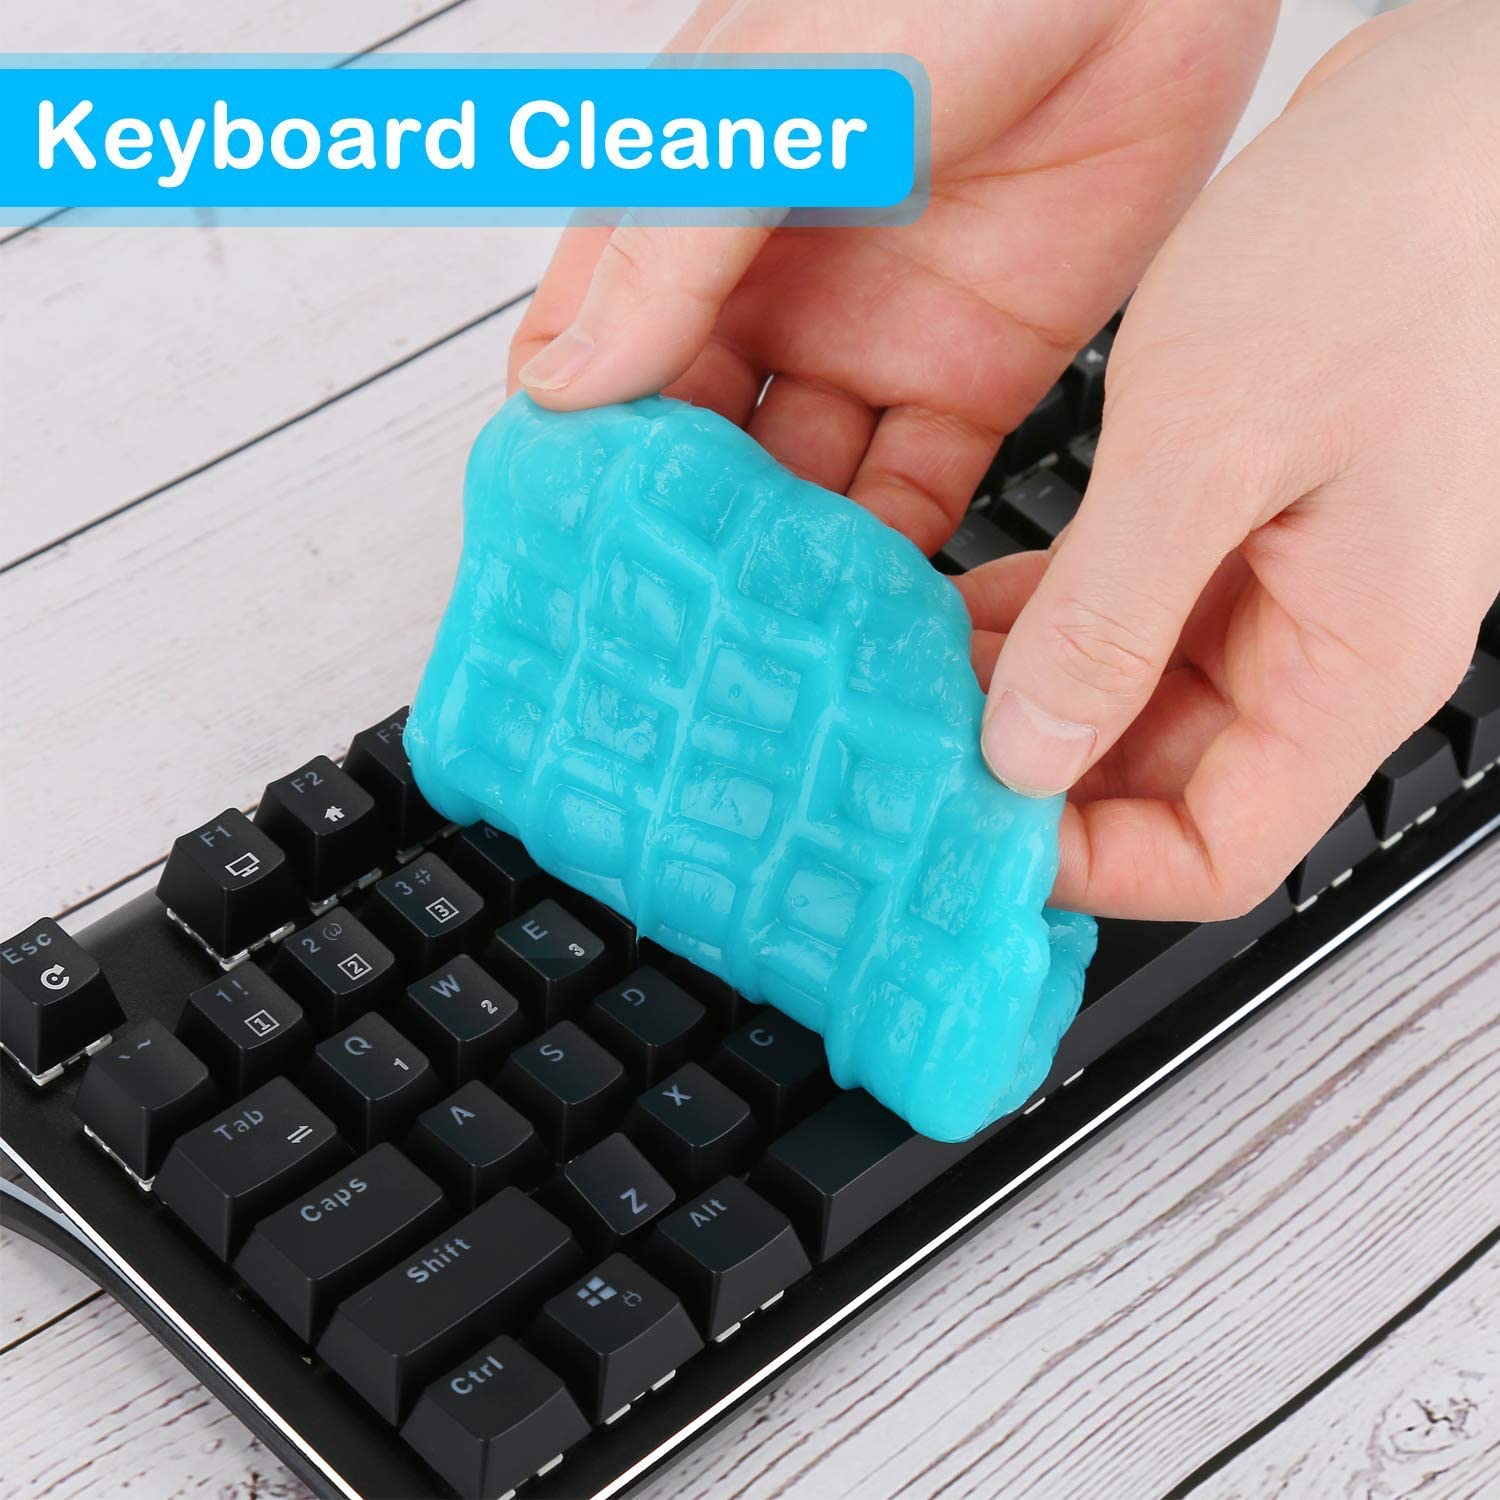 Blue colored cleaning gel being used to pick up dust and dirt off a computer keyboard.